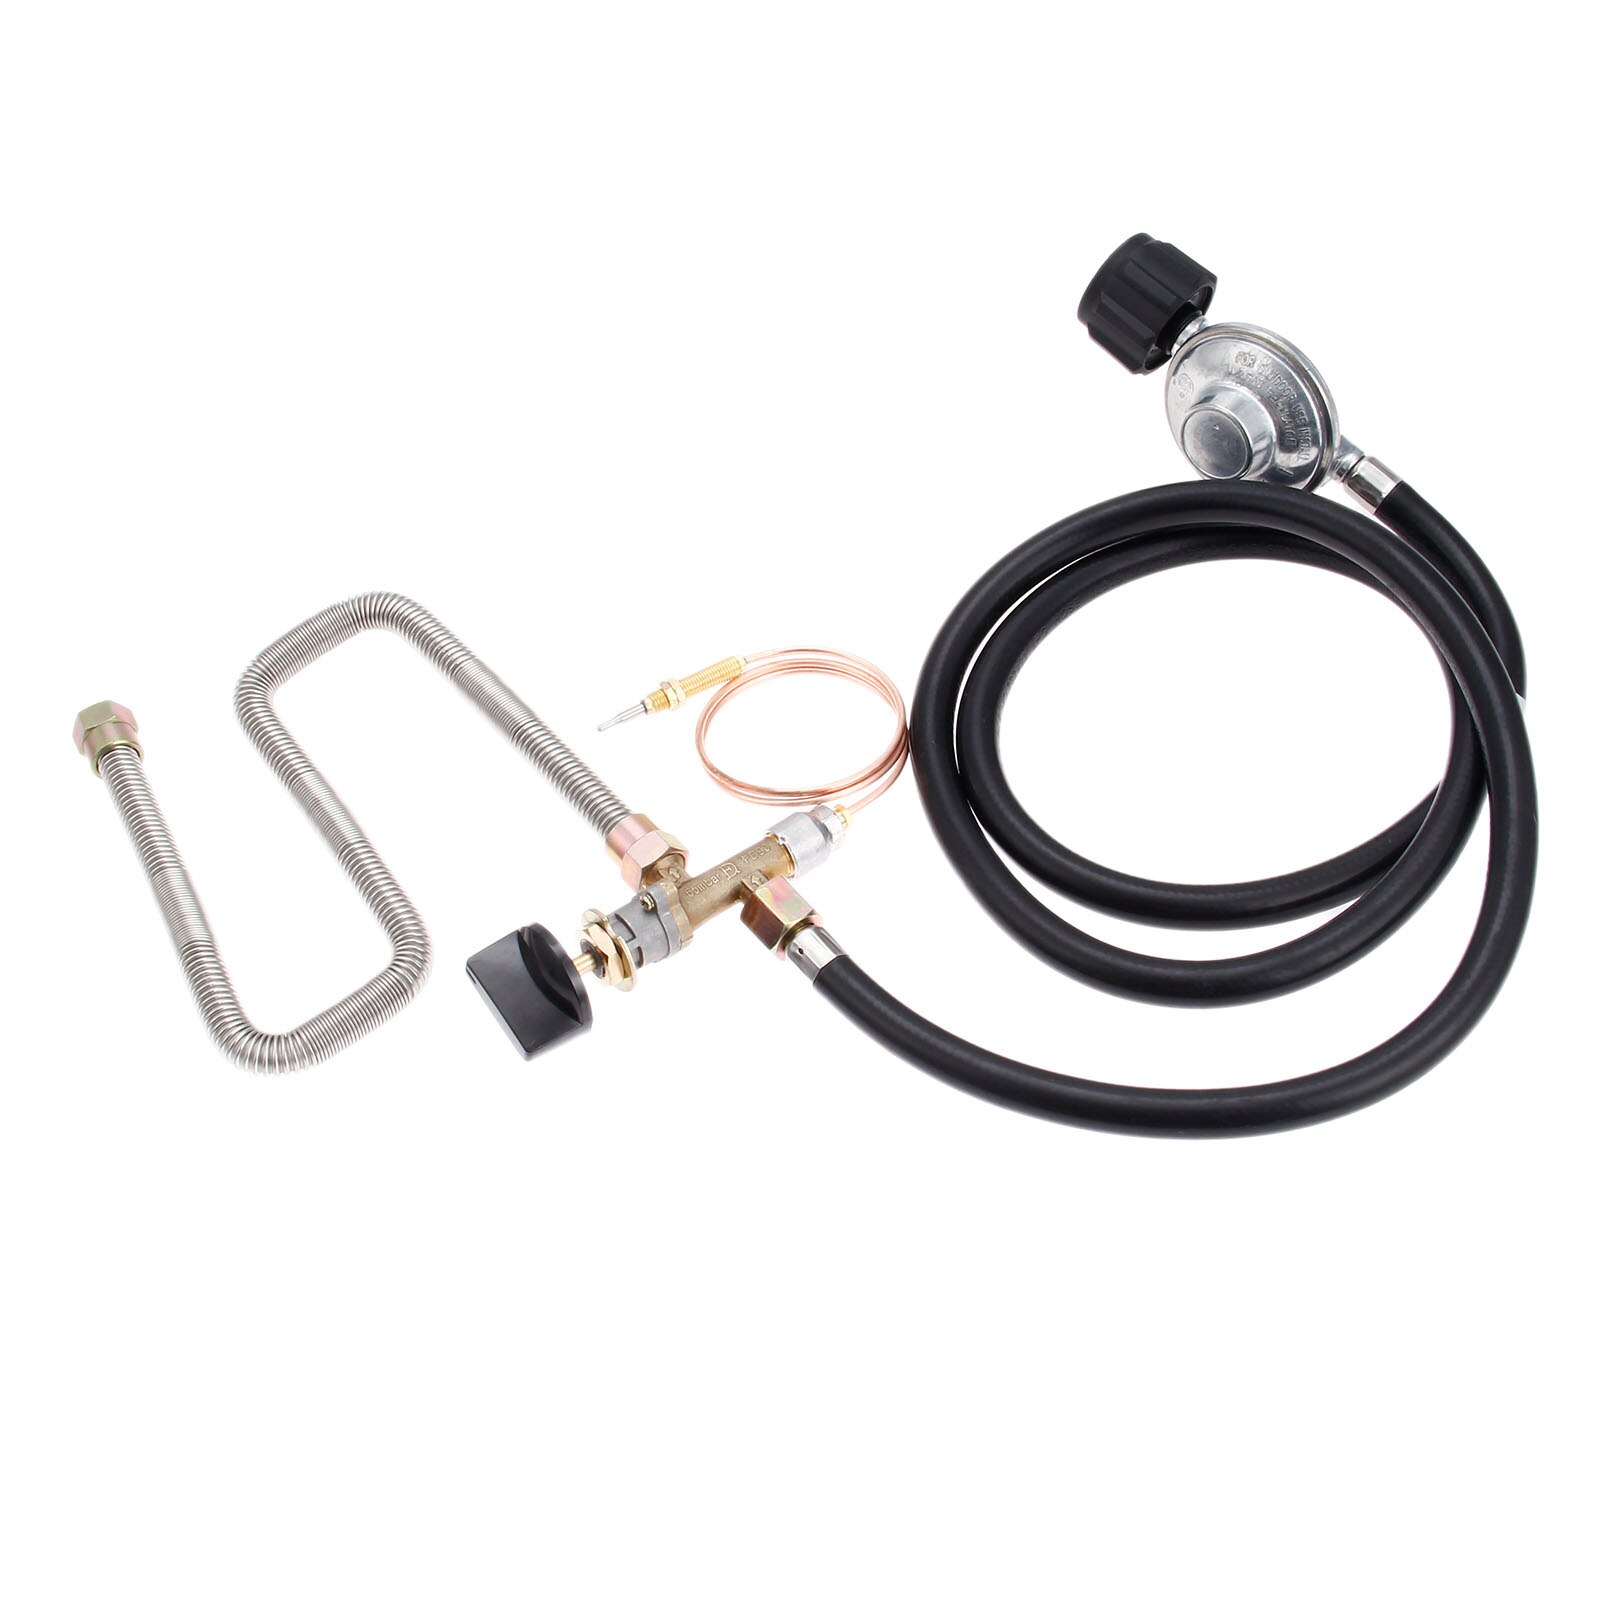 Propane Fire Pit Gas Control Valve System Regulator Kit With Hose 600mm Universal M8 Thermocouple 24inch Whister Free Flex Line